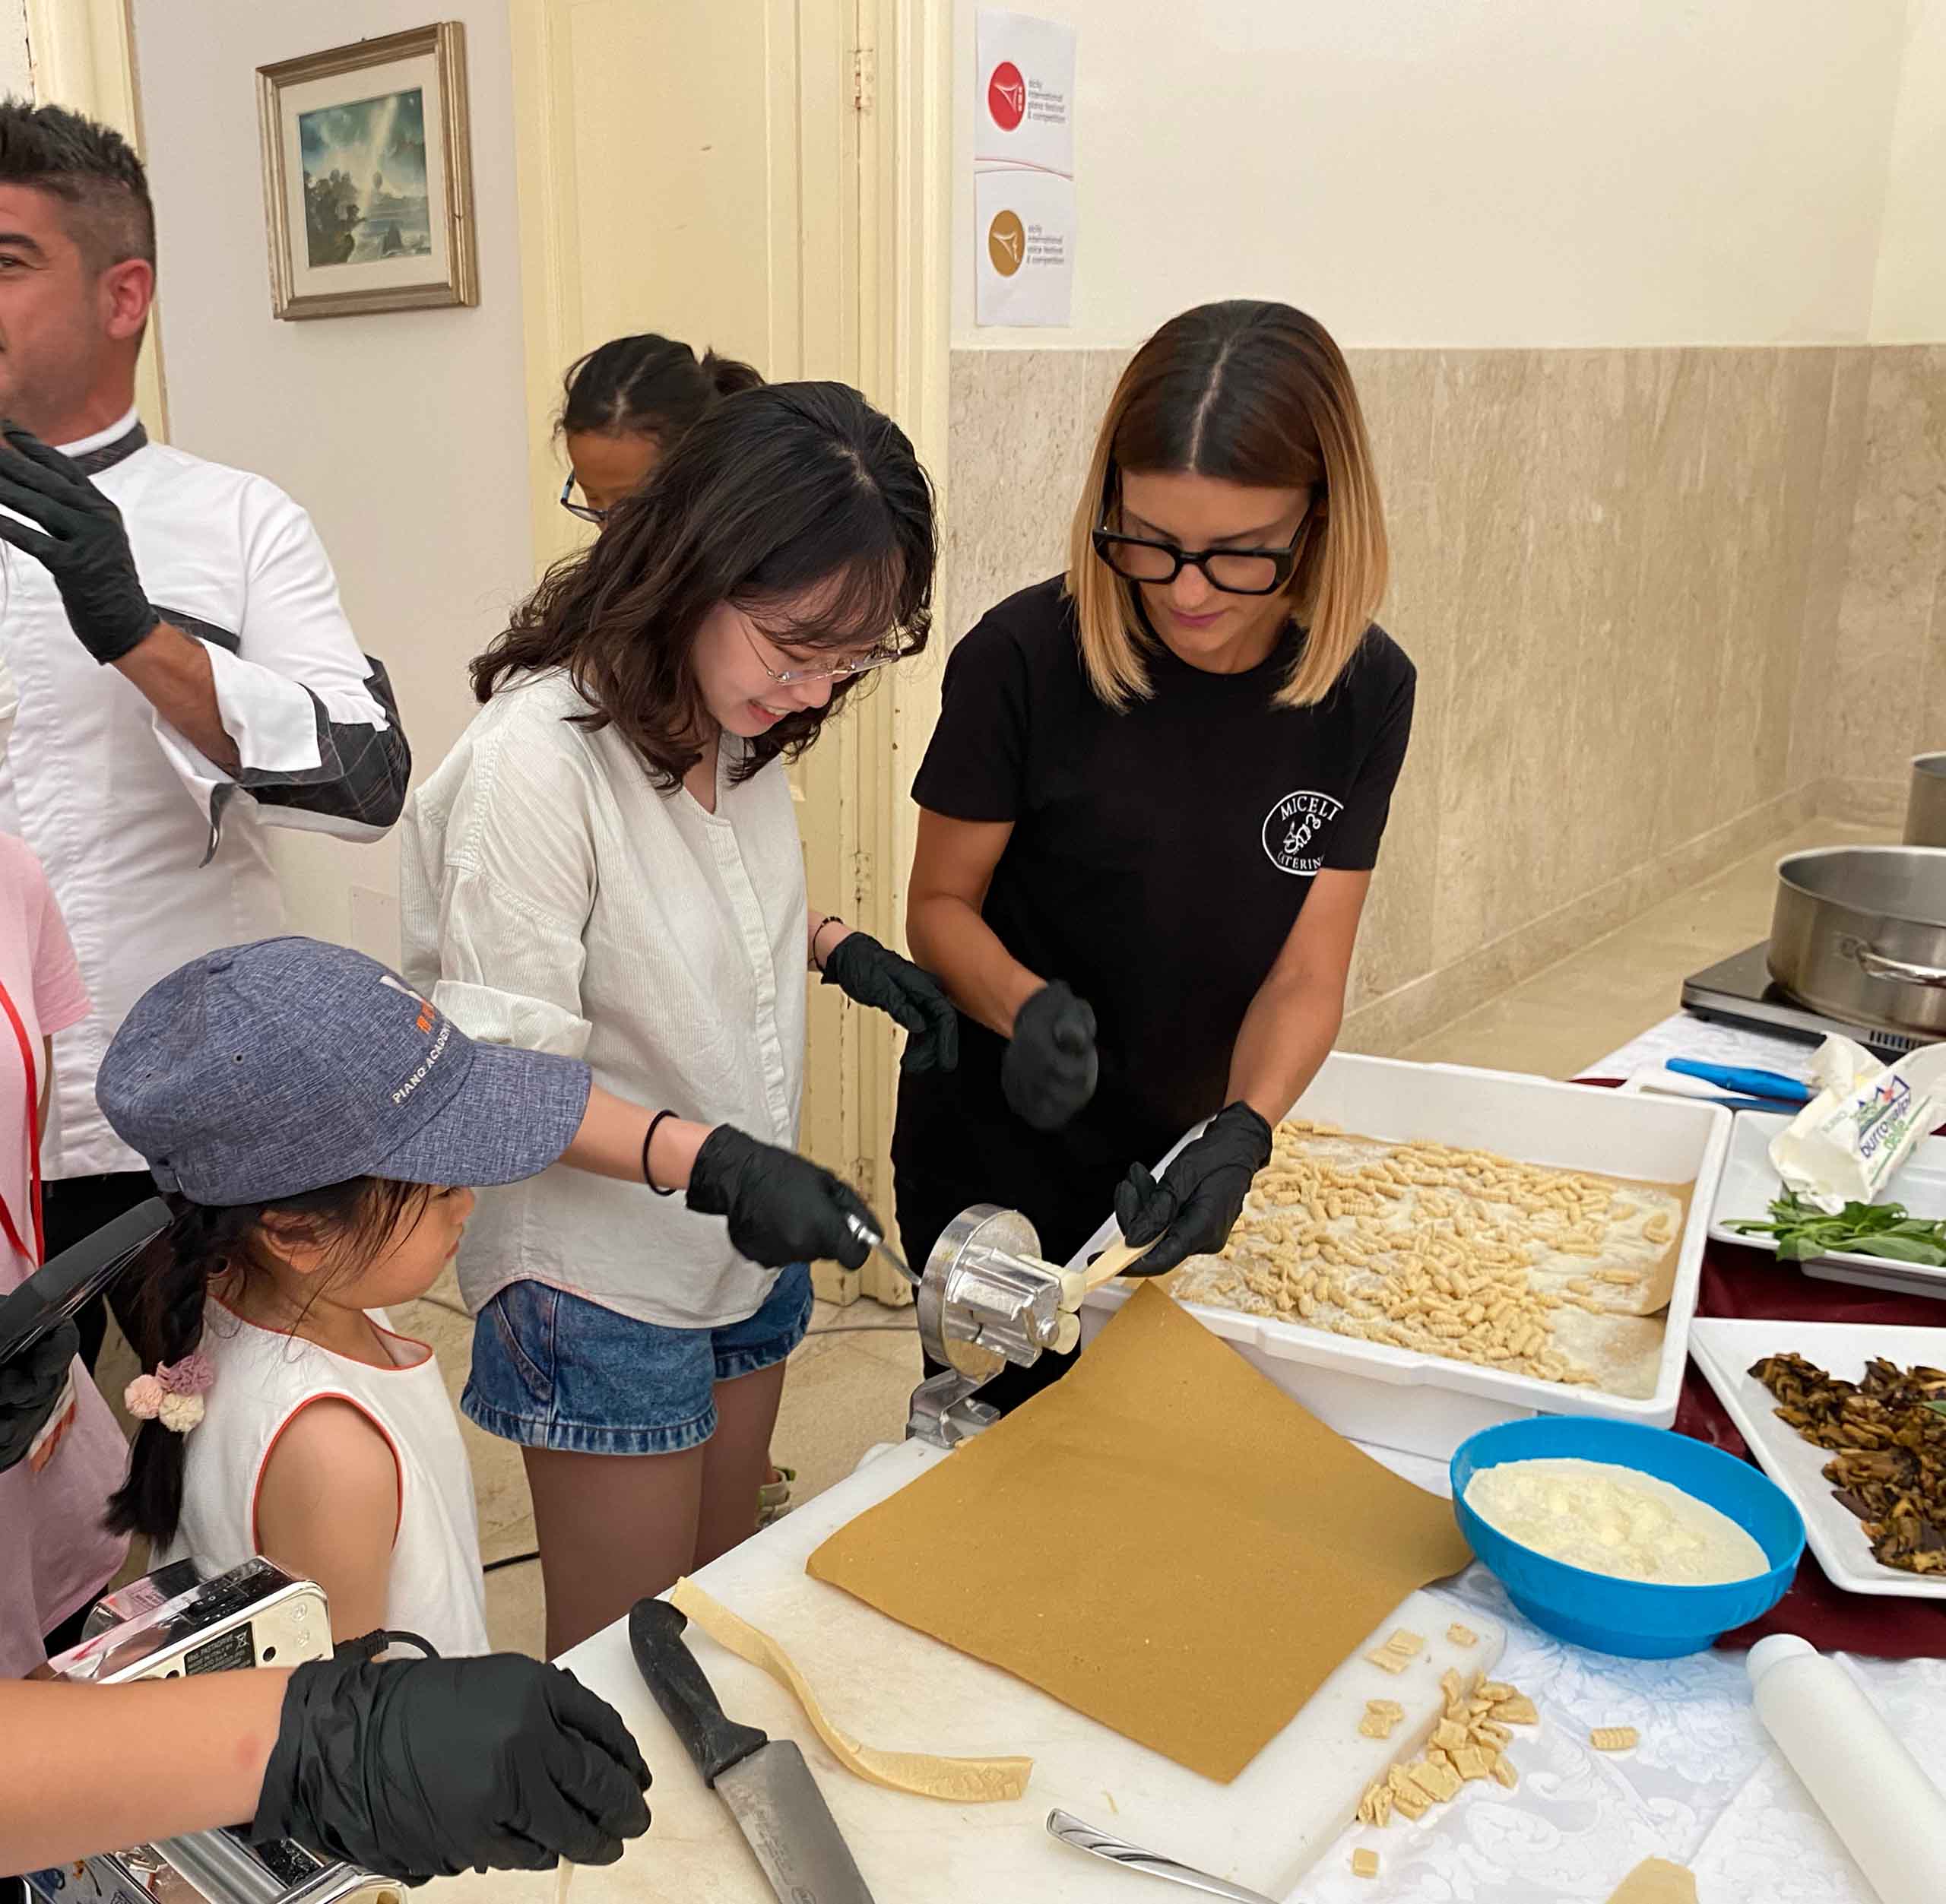 Hyerim Lee hand rolls pasta with an instructor and onlookers.